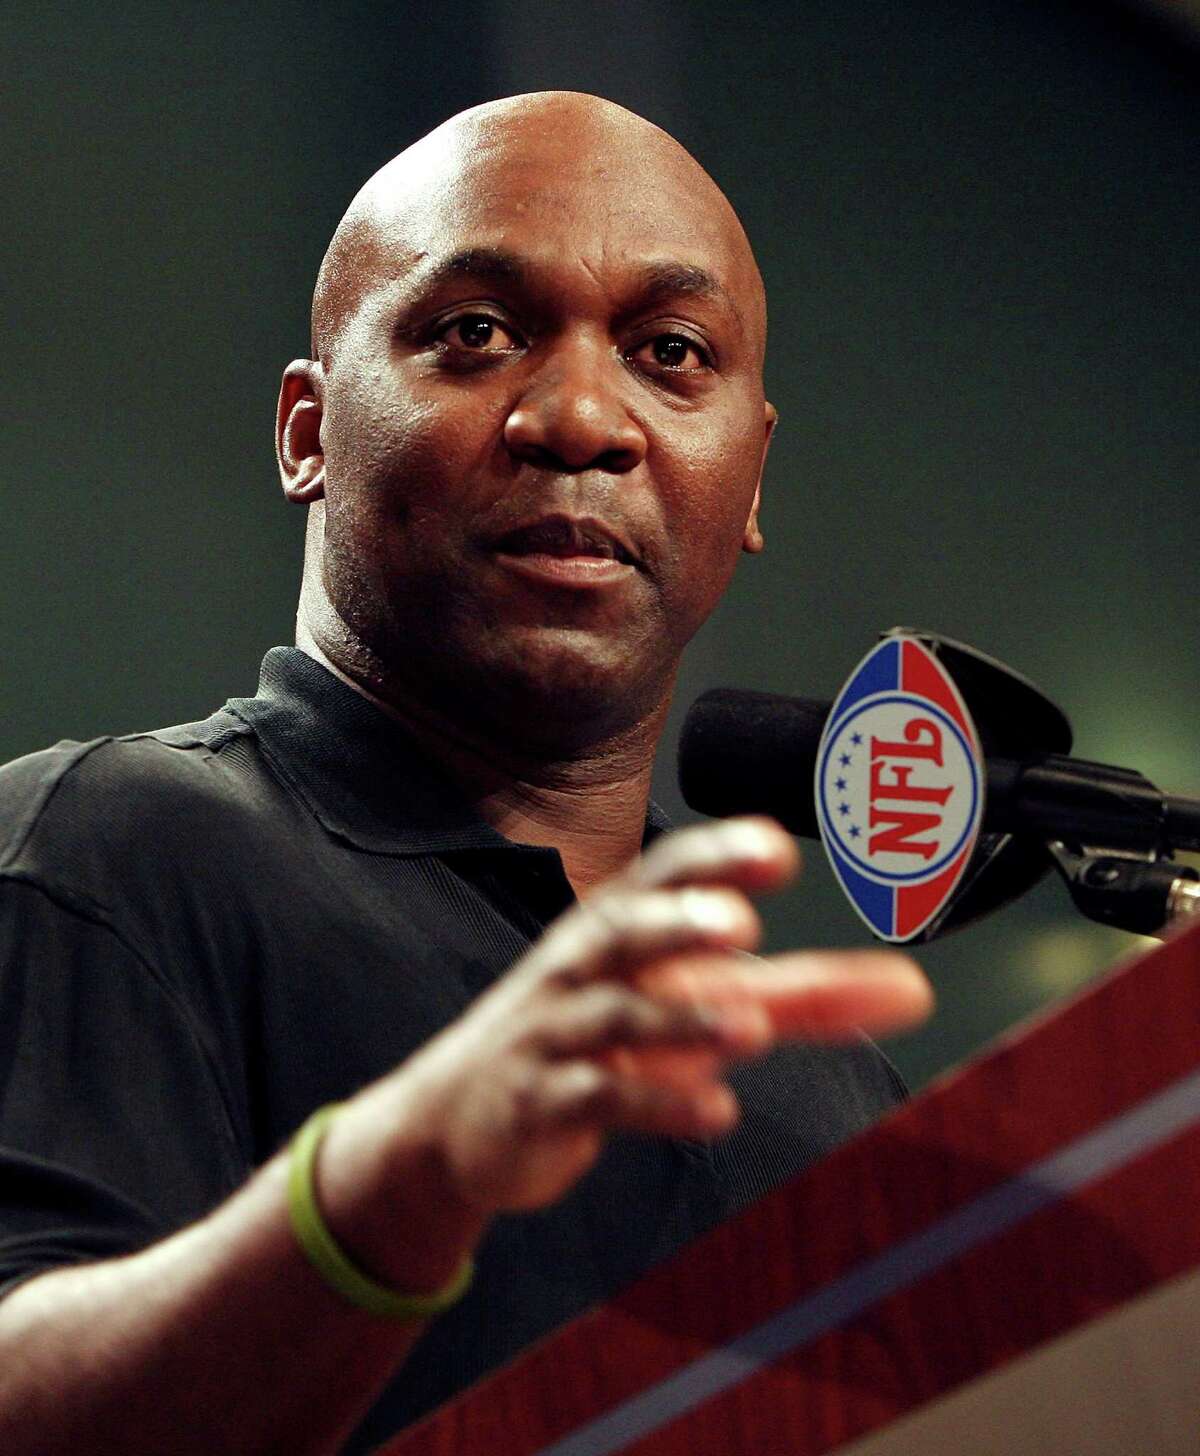 MIAMI - FEBRUARY 03: Hall of Fame inductee, Thurman Thomas, formerly of the Buffalo Bills, makes his acceptance speech during the Super Bowl XLI Pro Football Hall of Fame Press Conference at the Miami Convention Center on February 3, 2007 in Miami, Florida. (Photo by Nick Laham/Getty Images) *** Local Caption *** Thurman Thomas